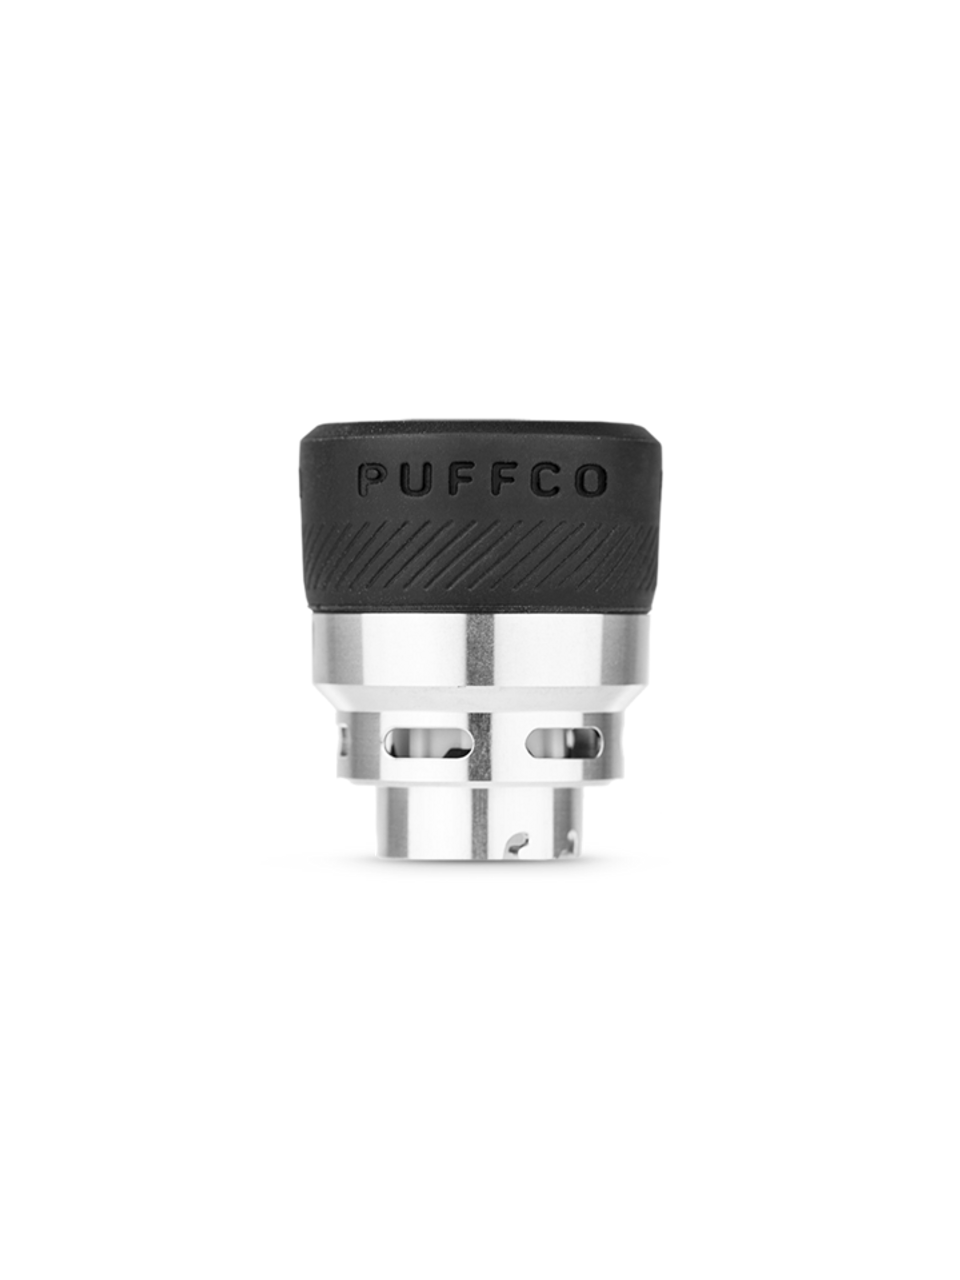 Puffco The Peak Atomizer: The Ultimate Guide for Vaping Enthusiasts